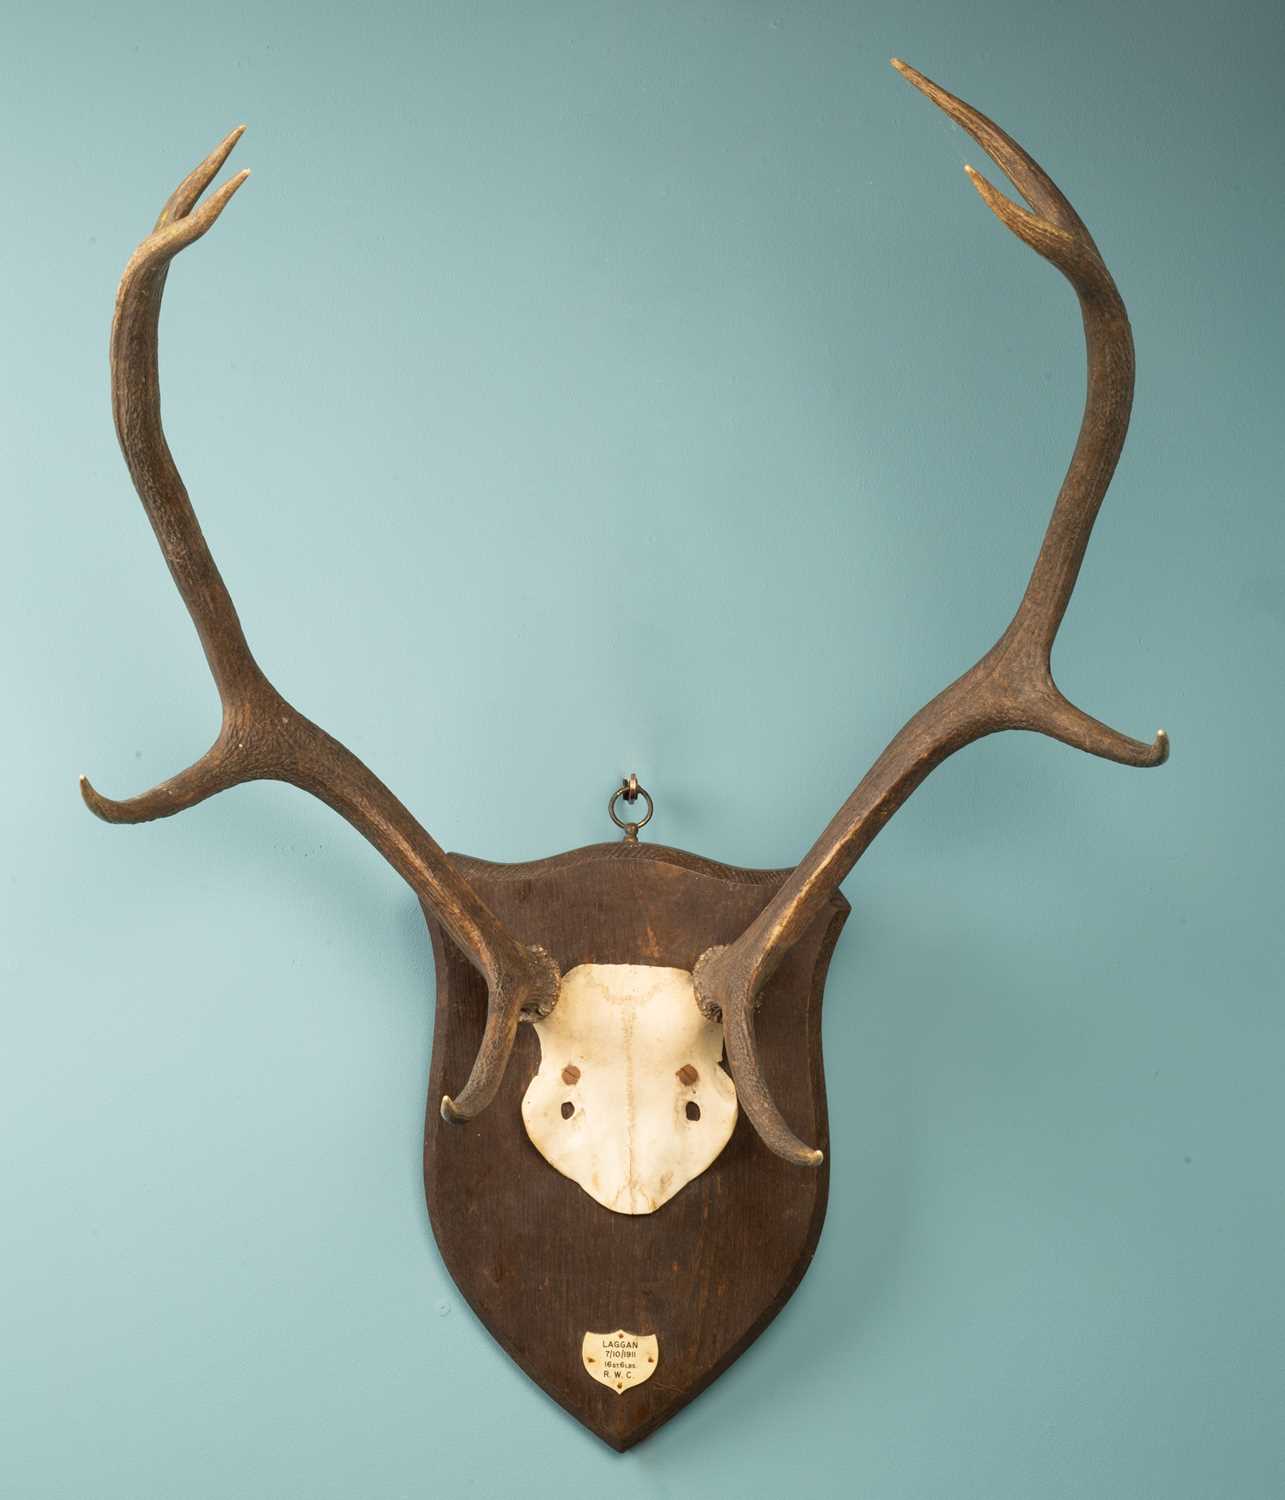 Lot 65 - A taxidermy skull with antlers mounted on a wooden plaque